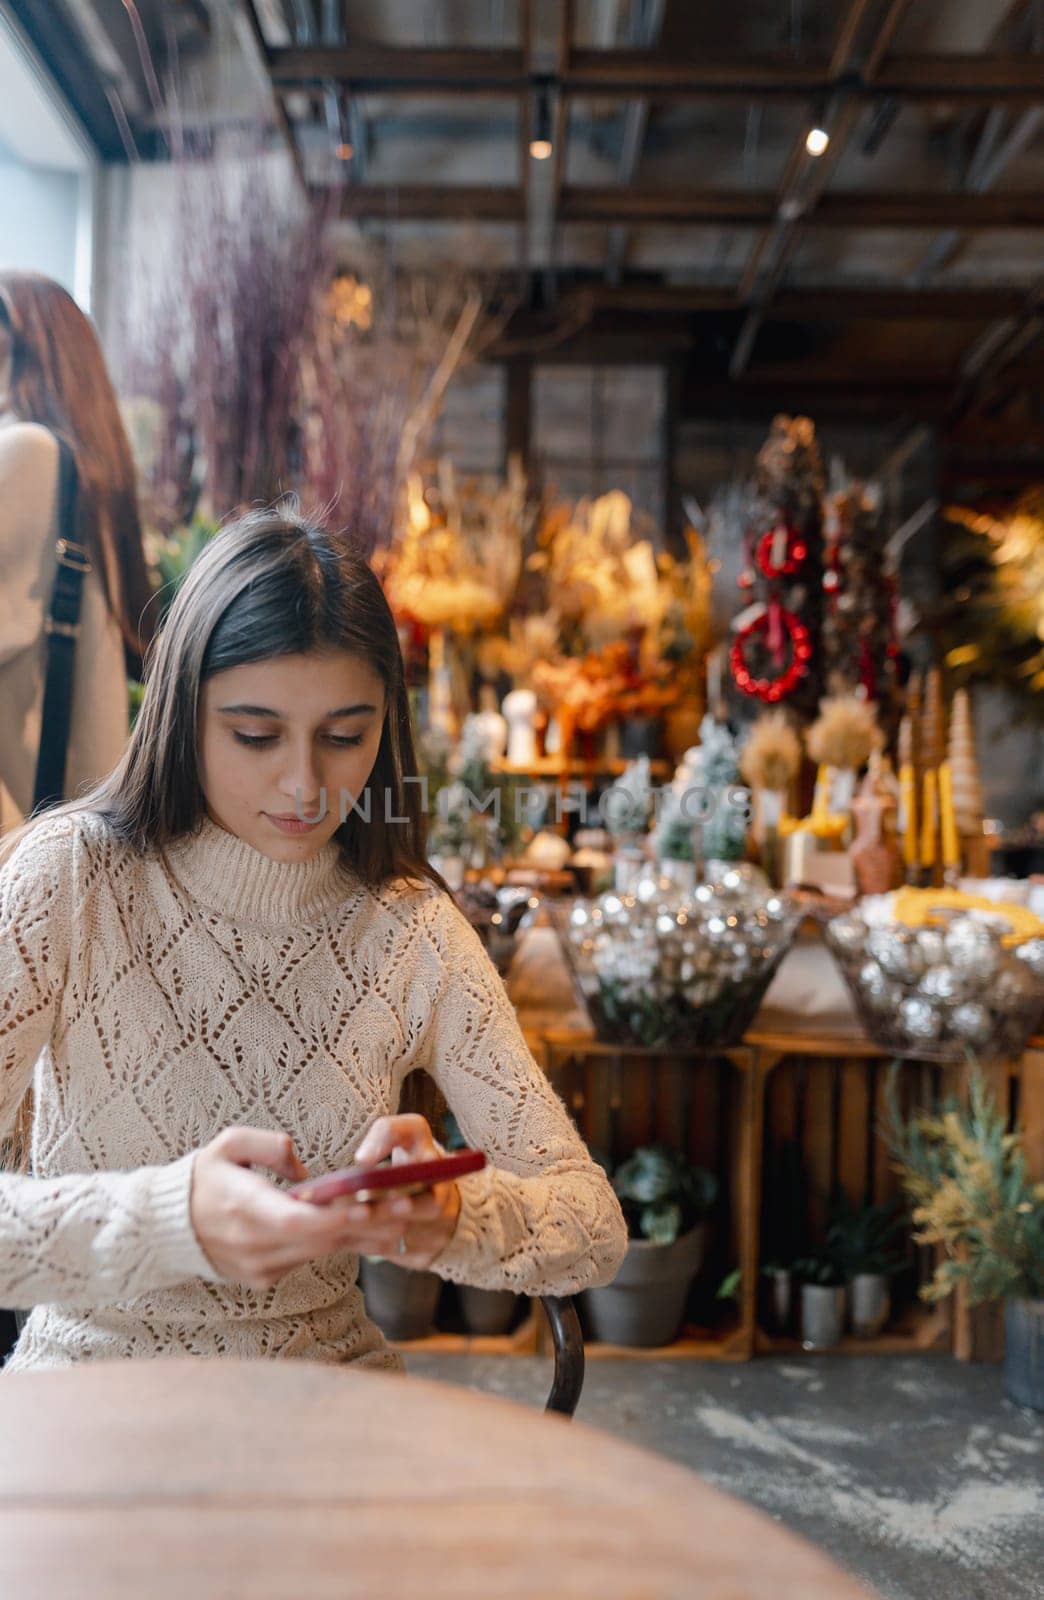 A gorgeous, bright young lady exploring holiday decorations while holding her smartphone. by teksomolika